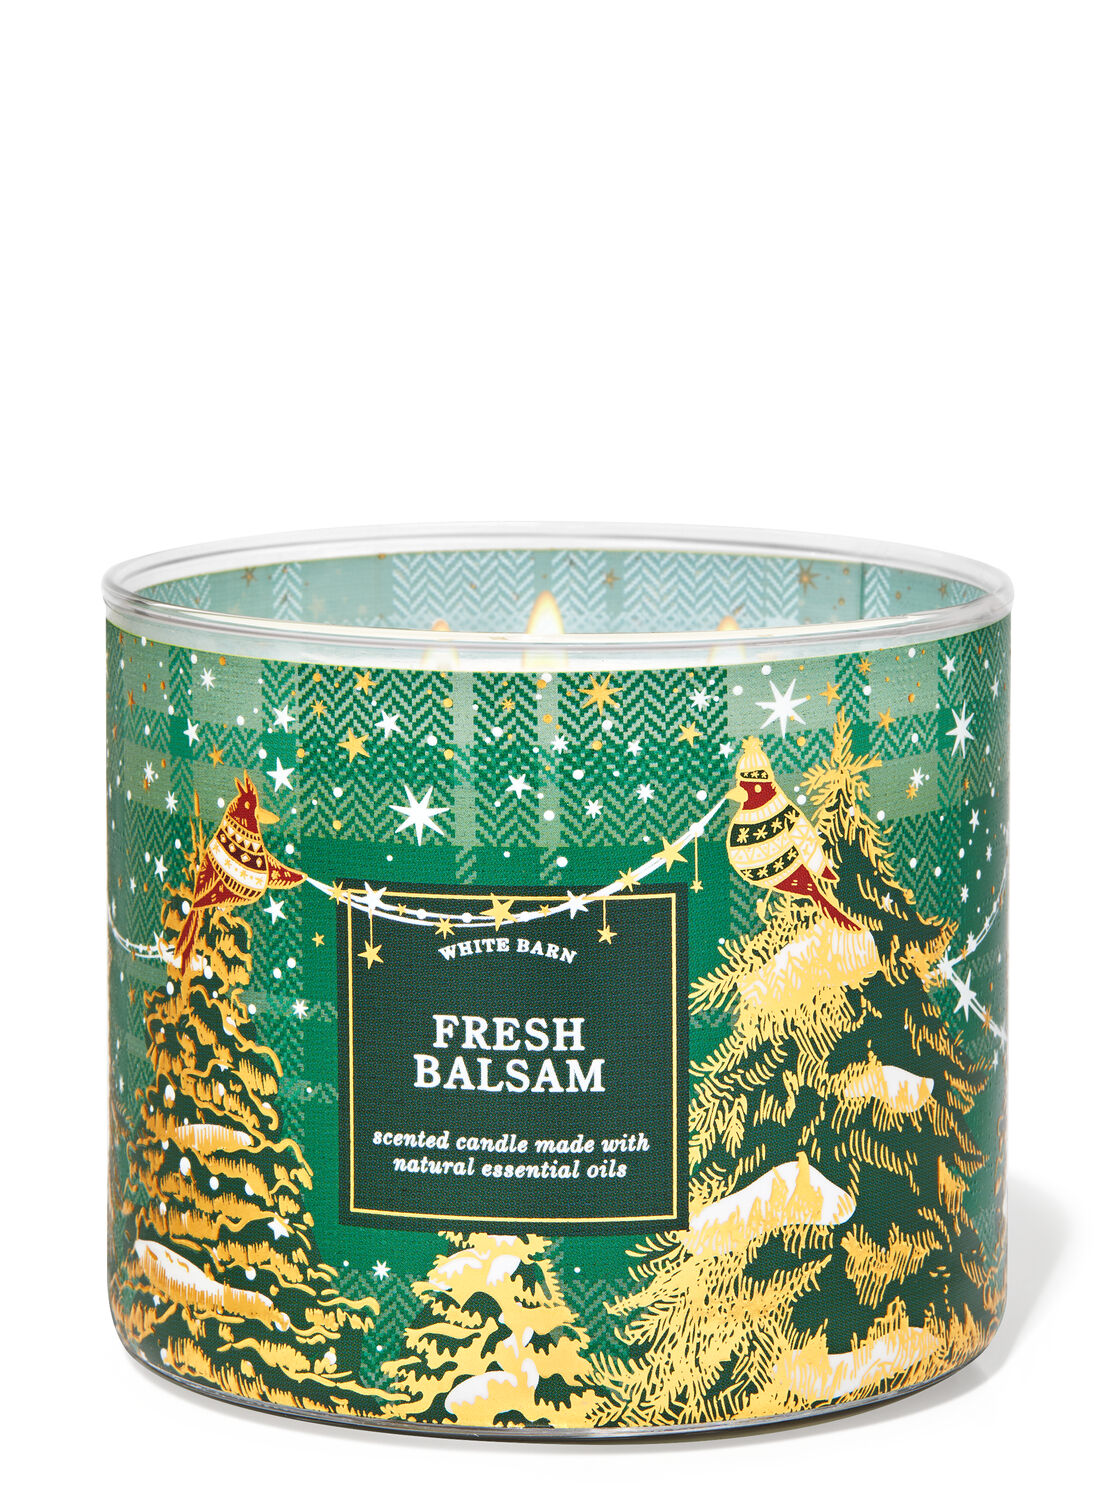 BATH & BODY WORKS FRESH BALSAM SCENTED CANDLE 3 WICK 14.5OZ LARGE FOREST PINE 